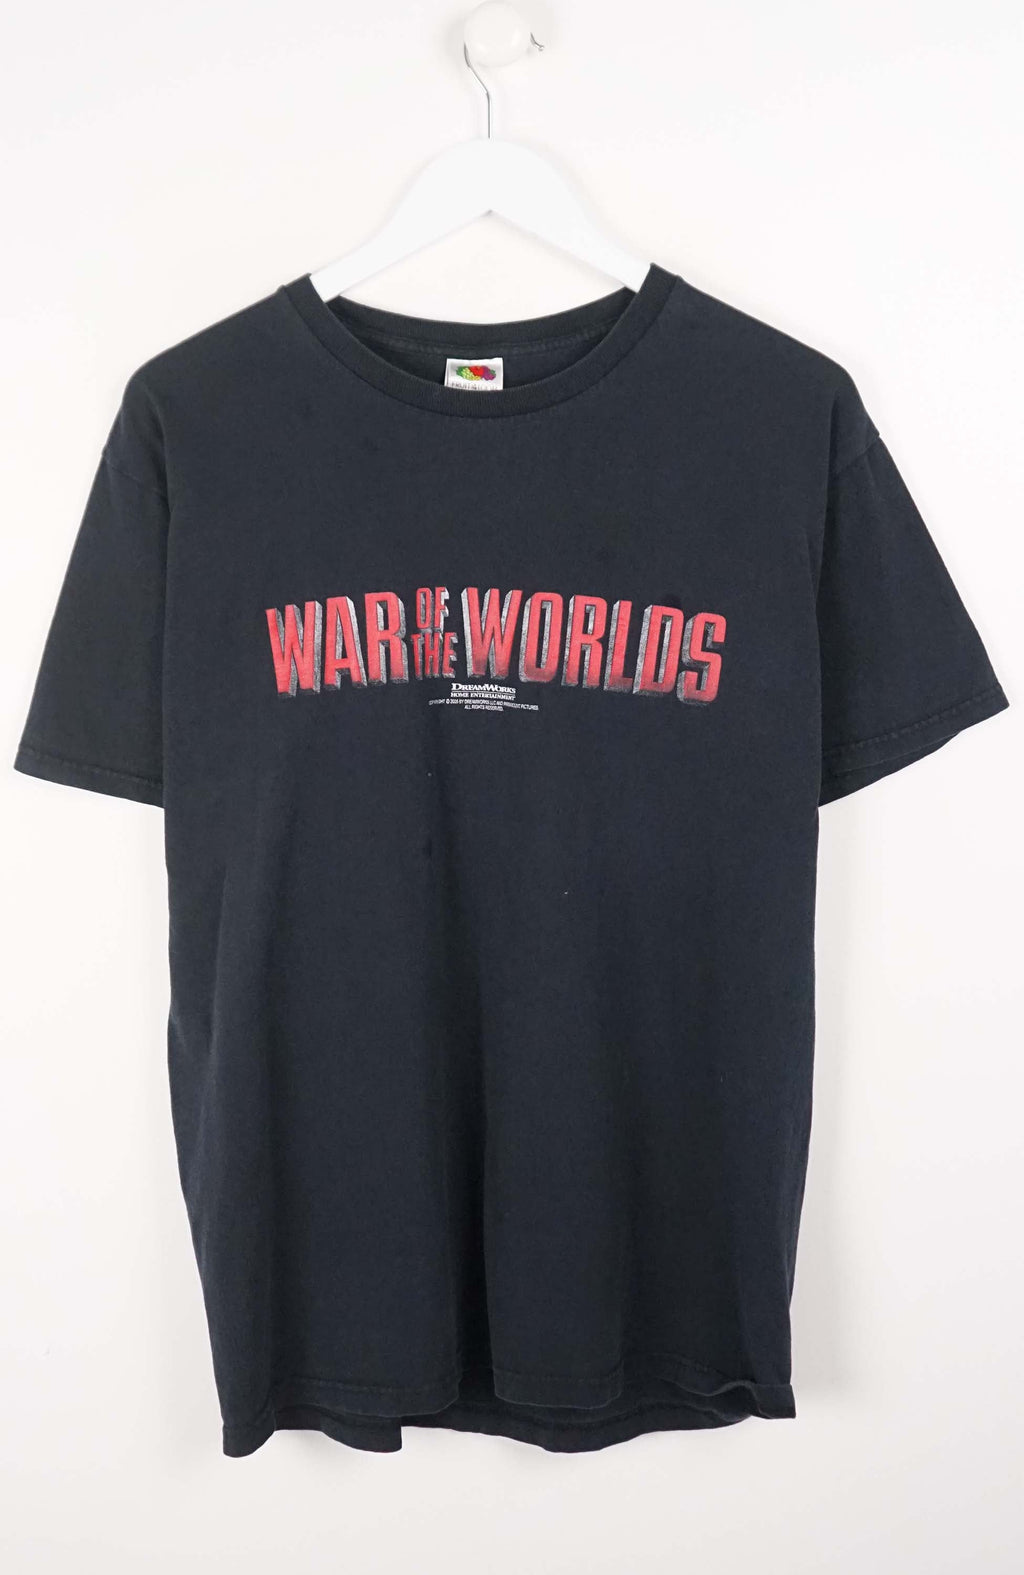 VINTAGE WAR OF THE WORLDS T-SHIRT (M)